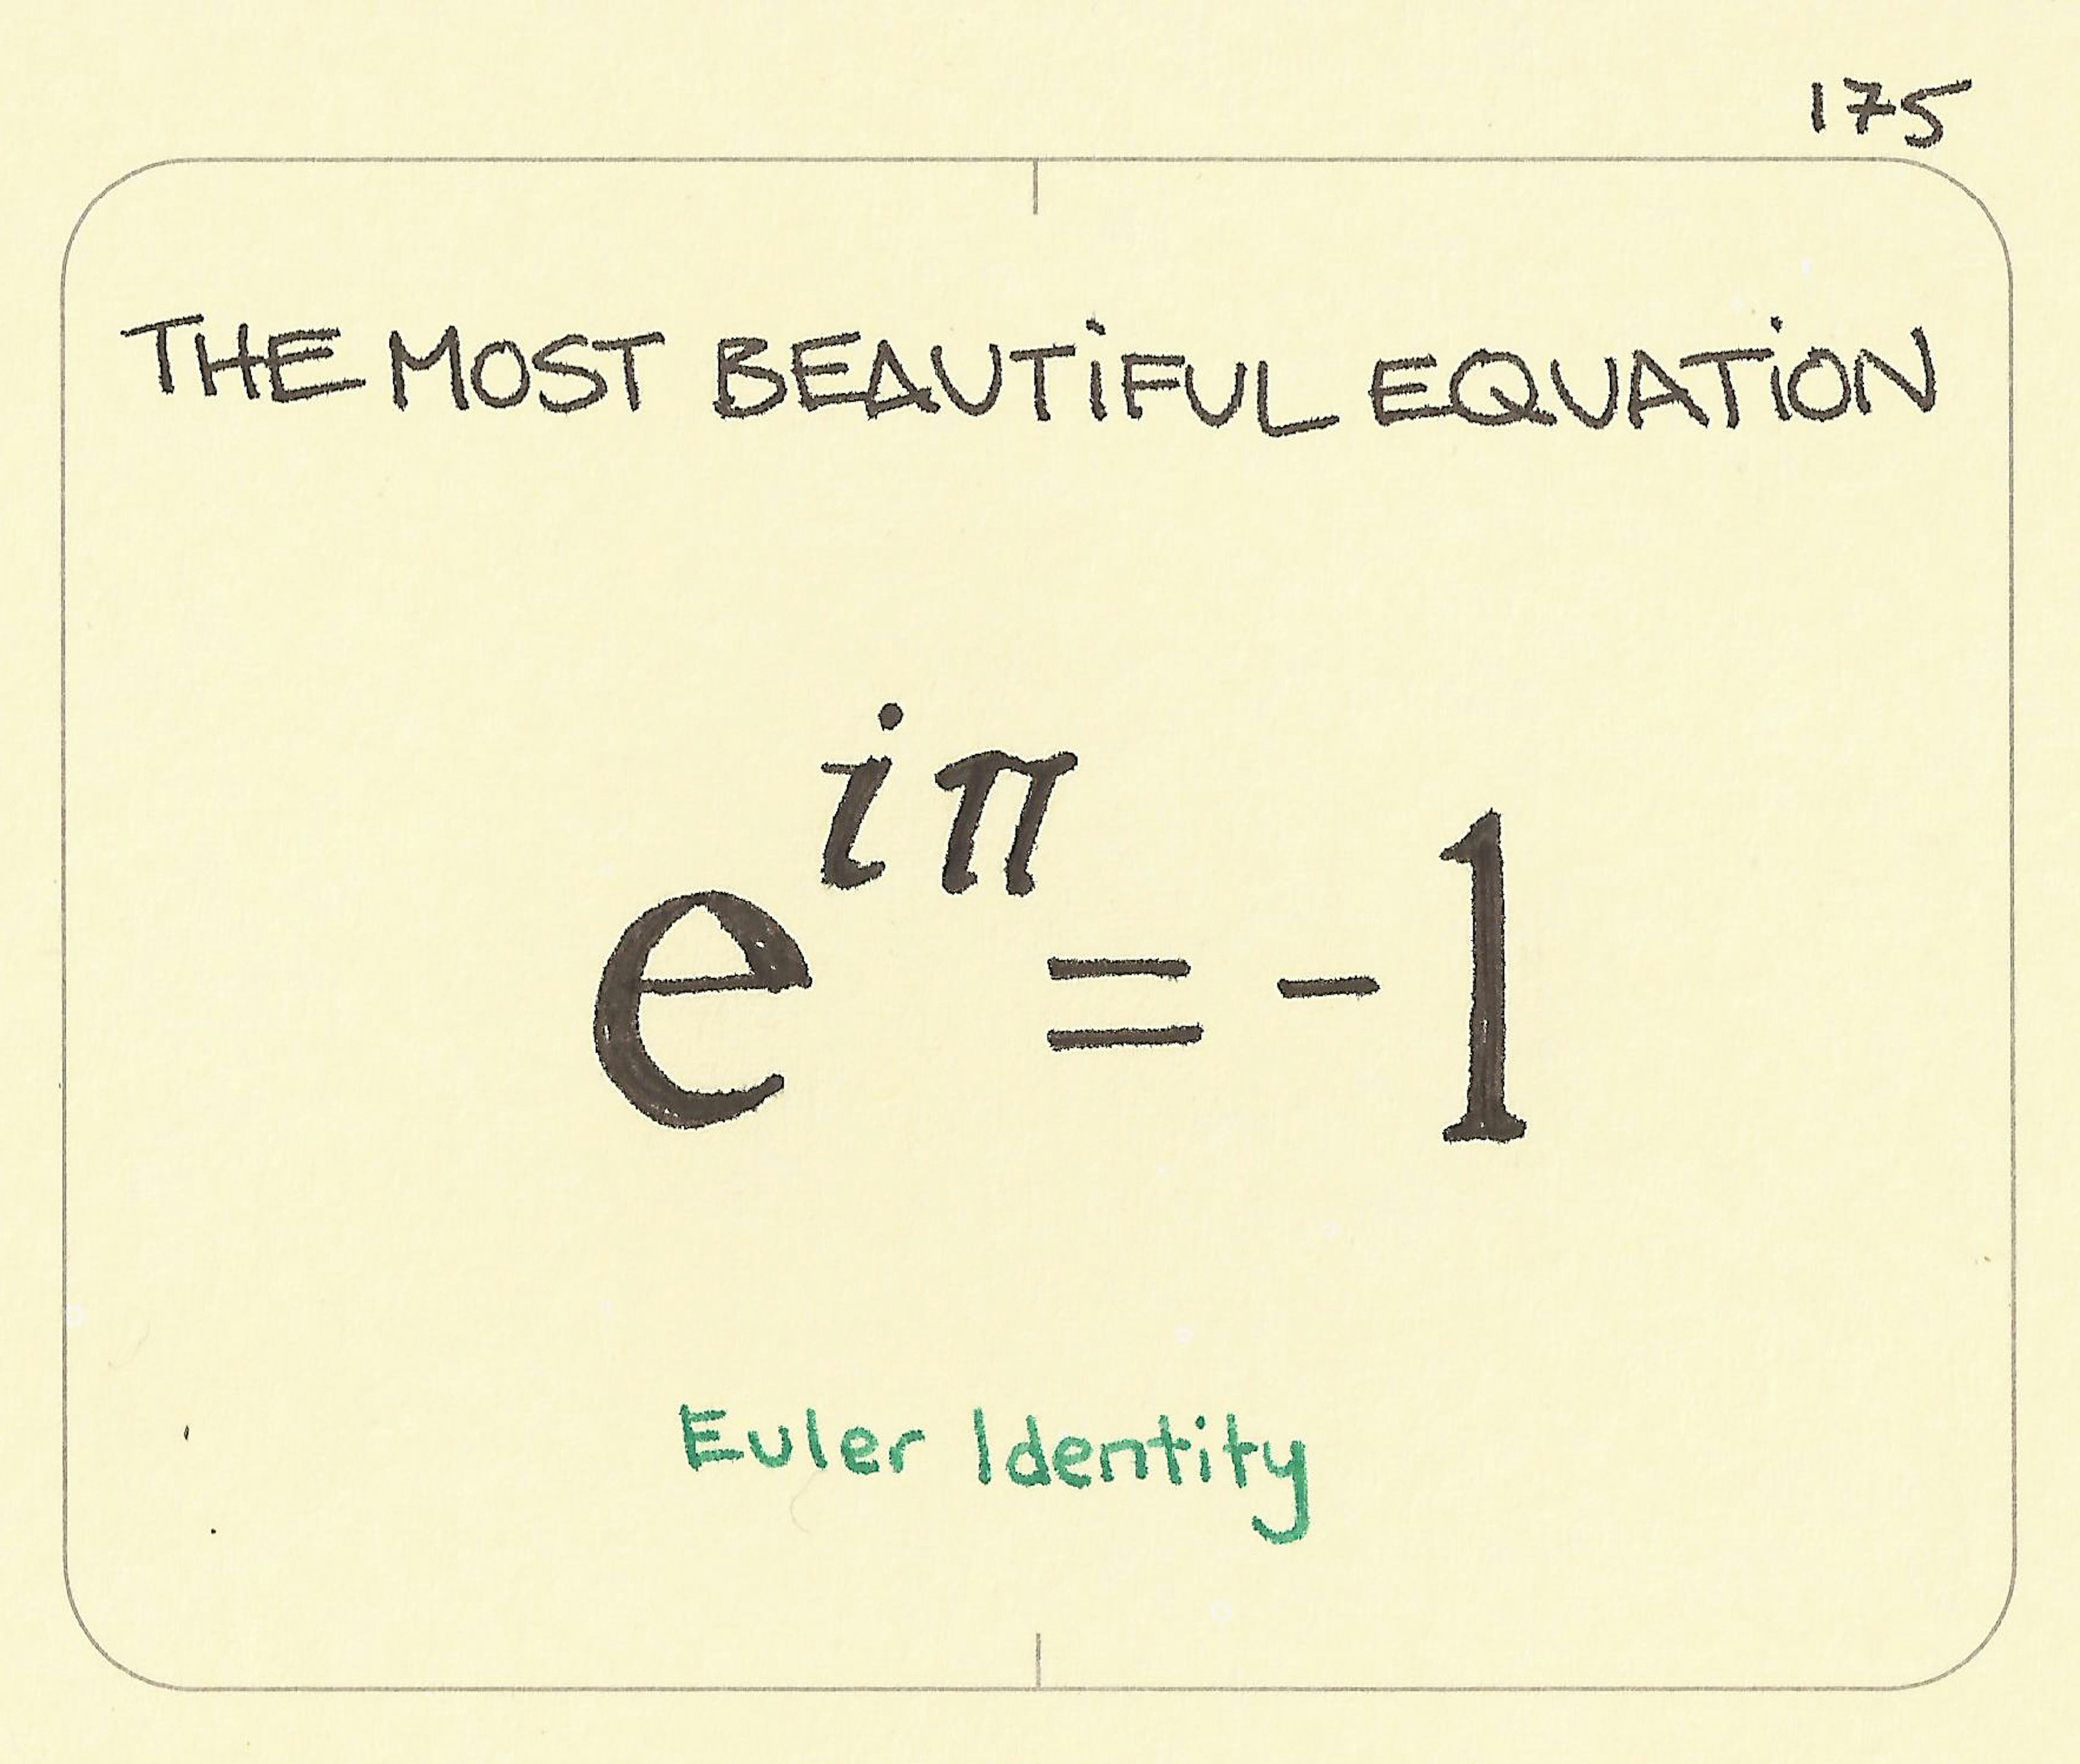 The most beautiful equation - Sketchplanations